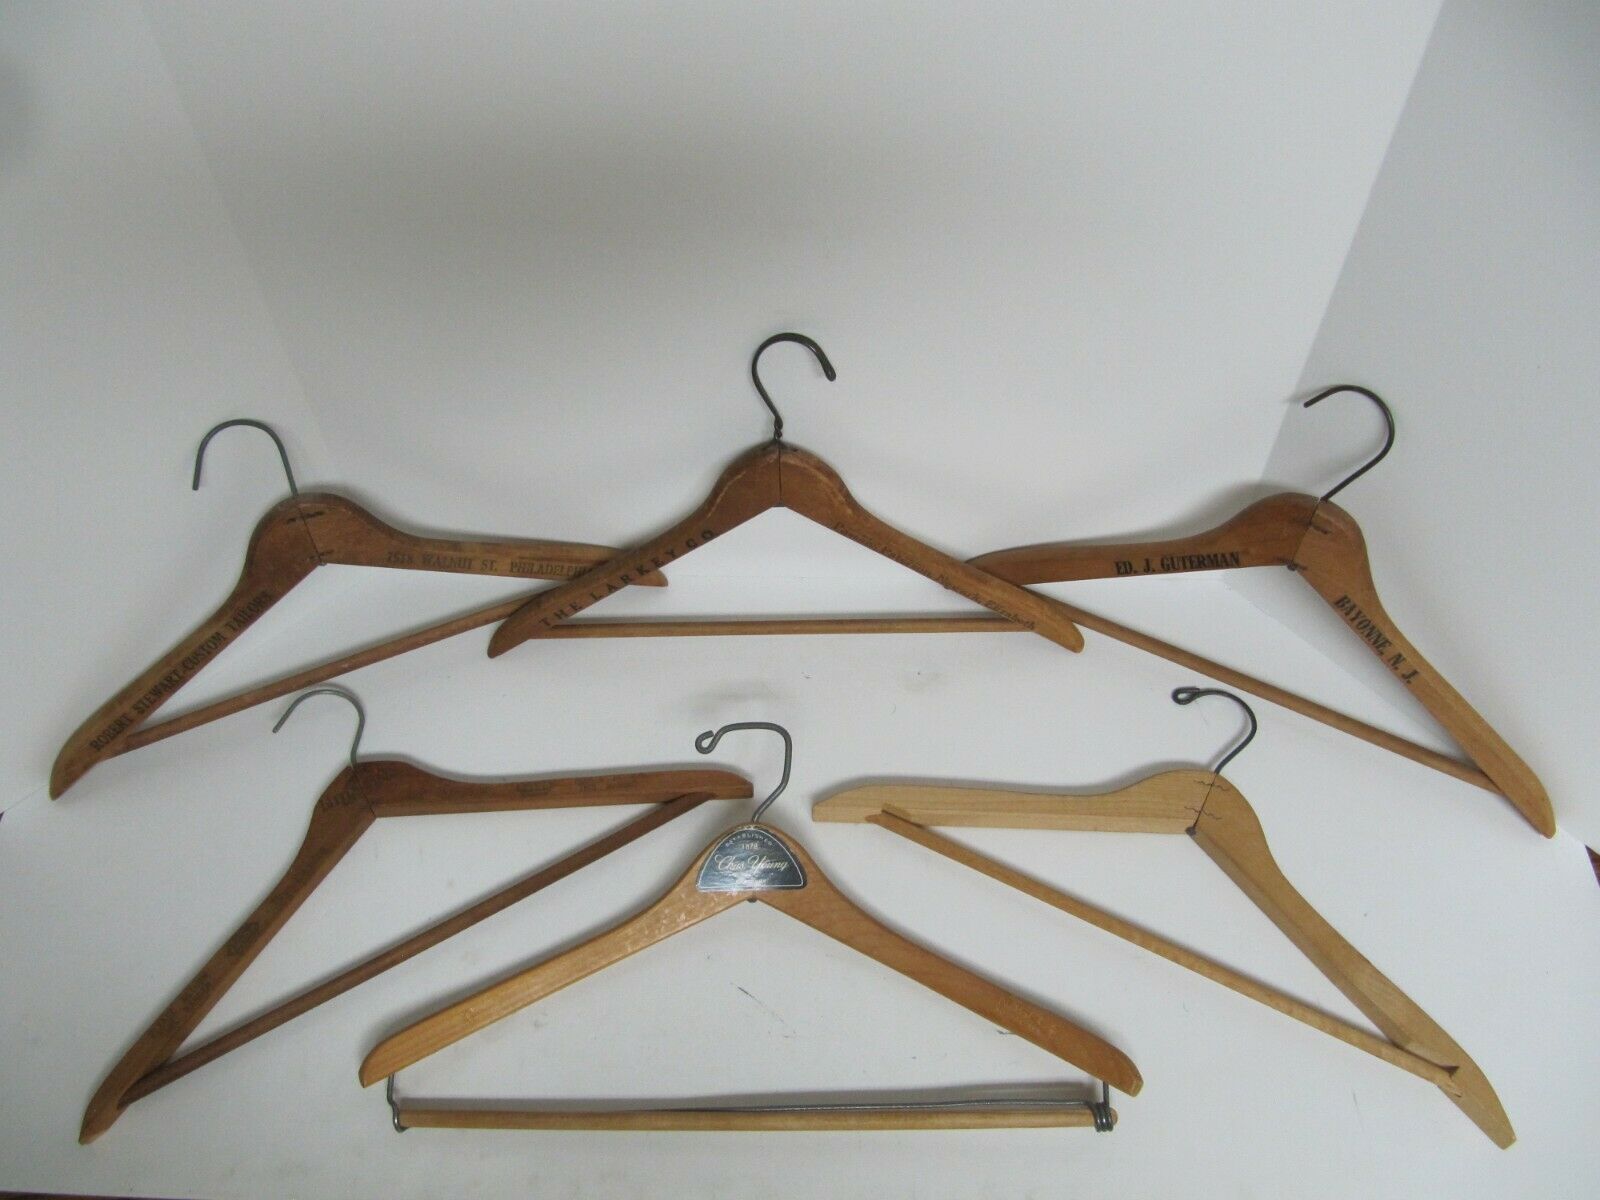 Antique Vintage Lot Of 6 Wooden Clothes Hangers Tailors Dept. Stores Cleaners